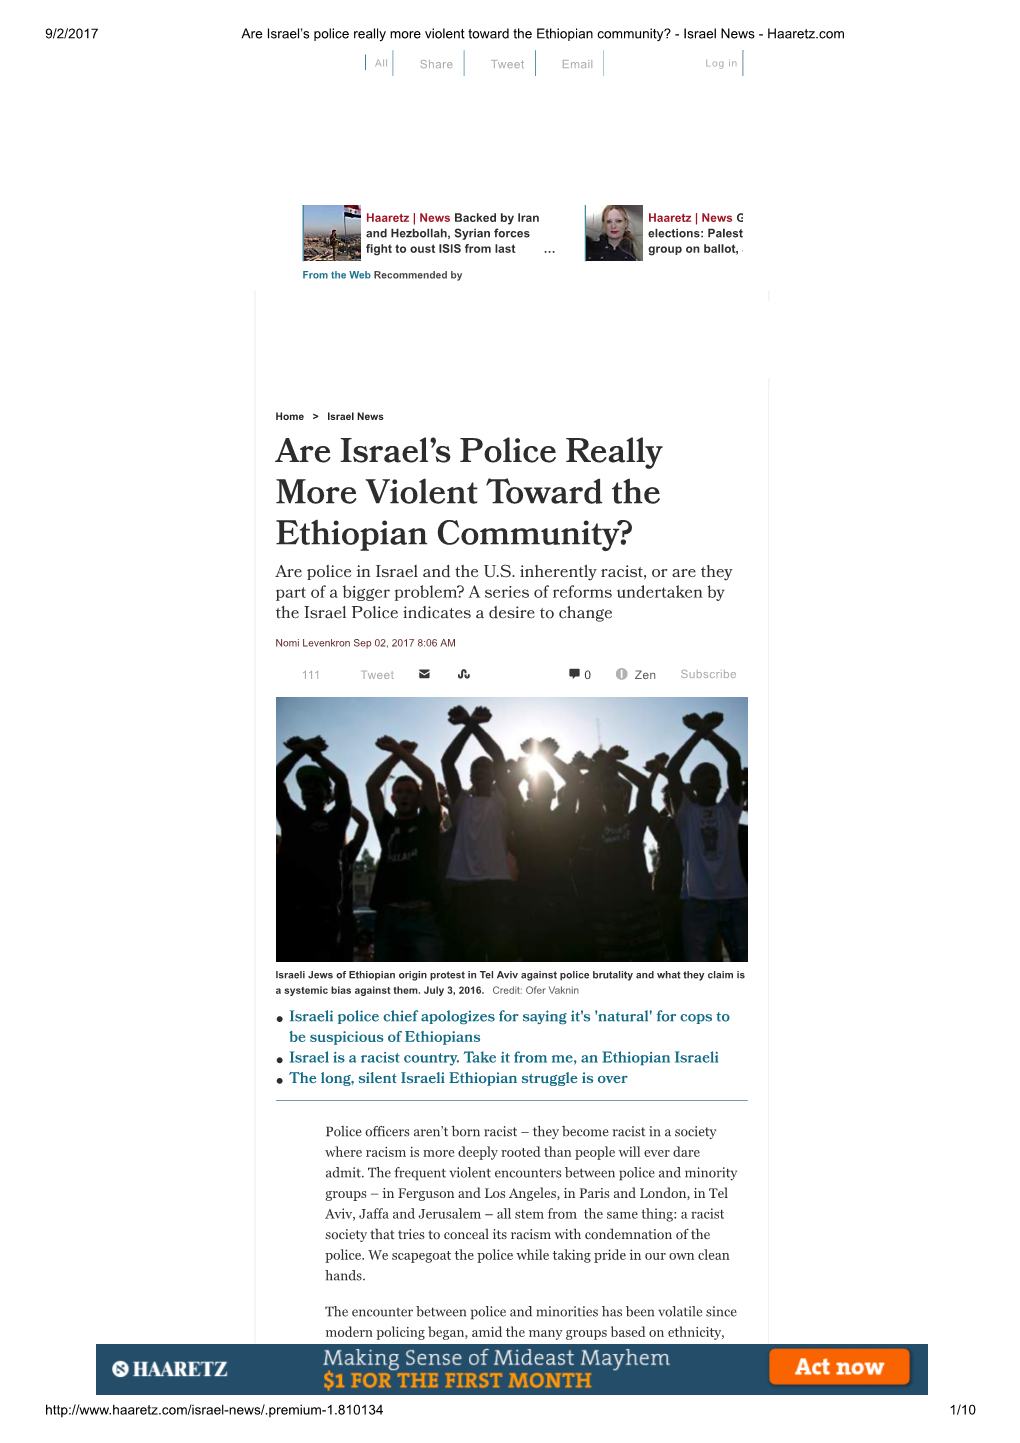 Are Israel's Police Really More Violent Toward the Ethiopian Community?